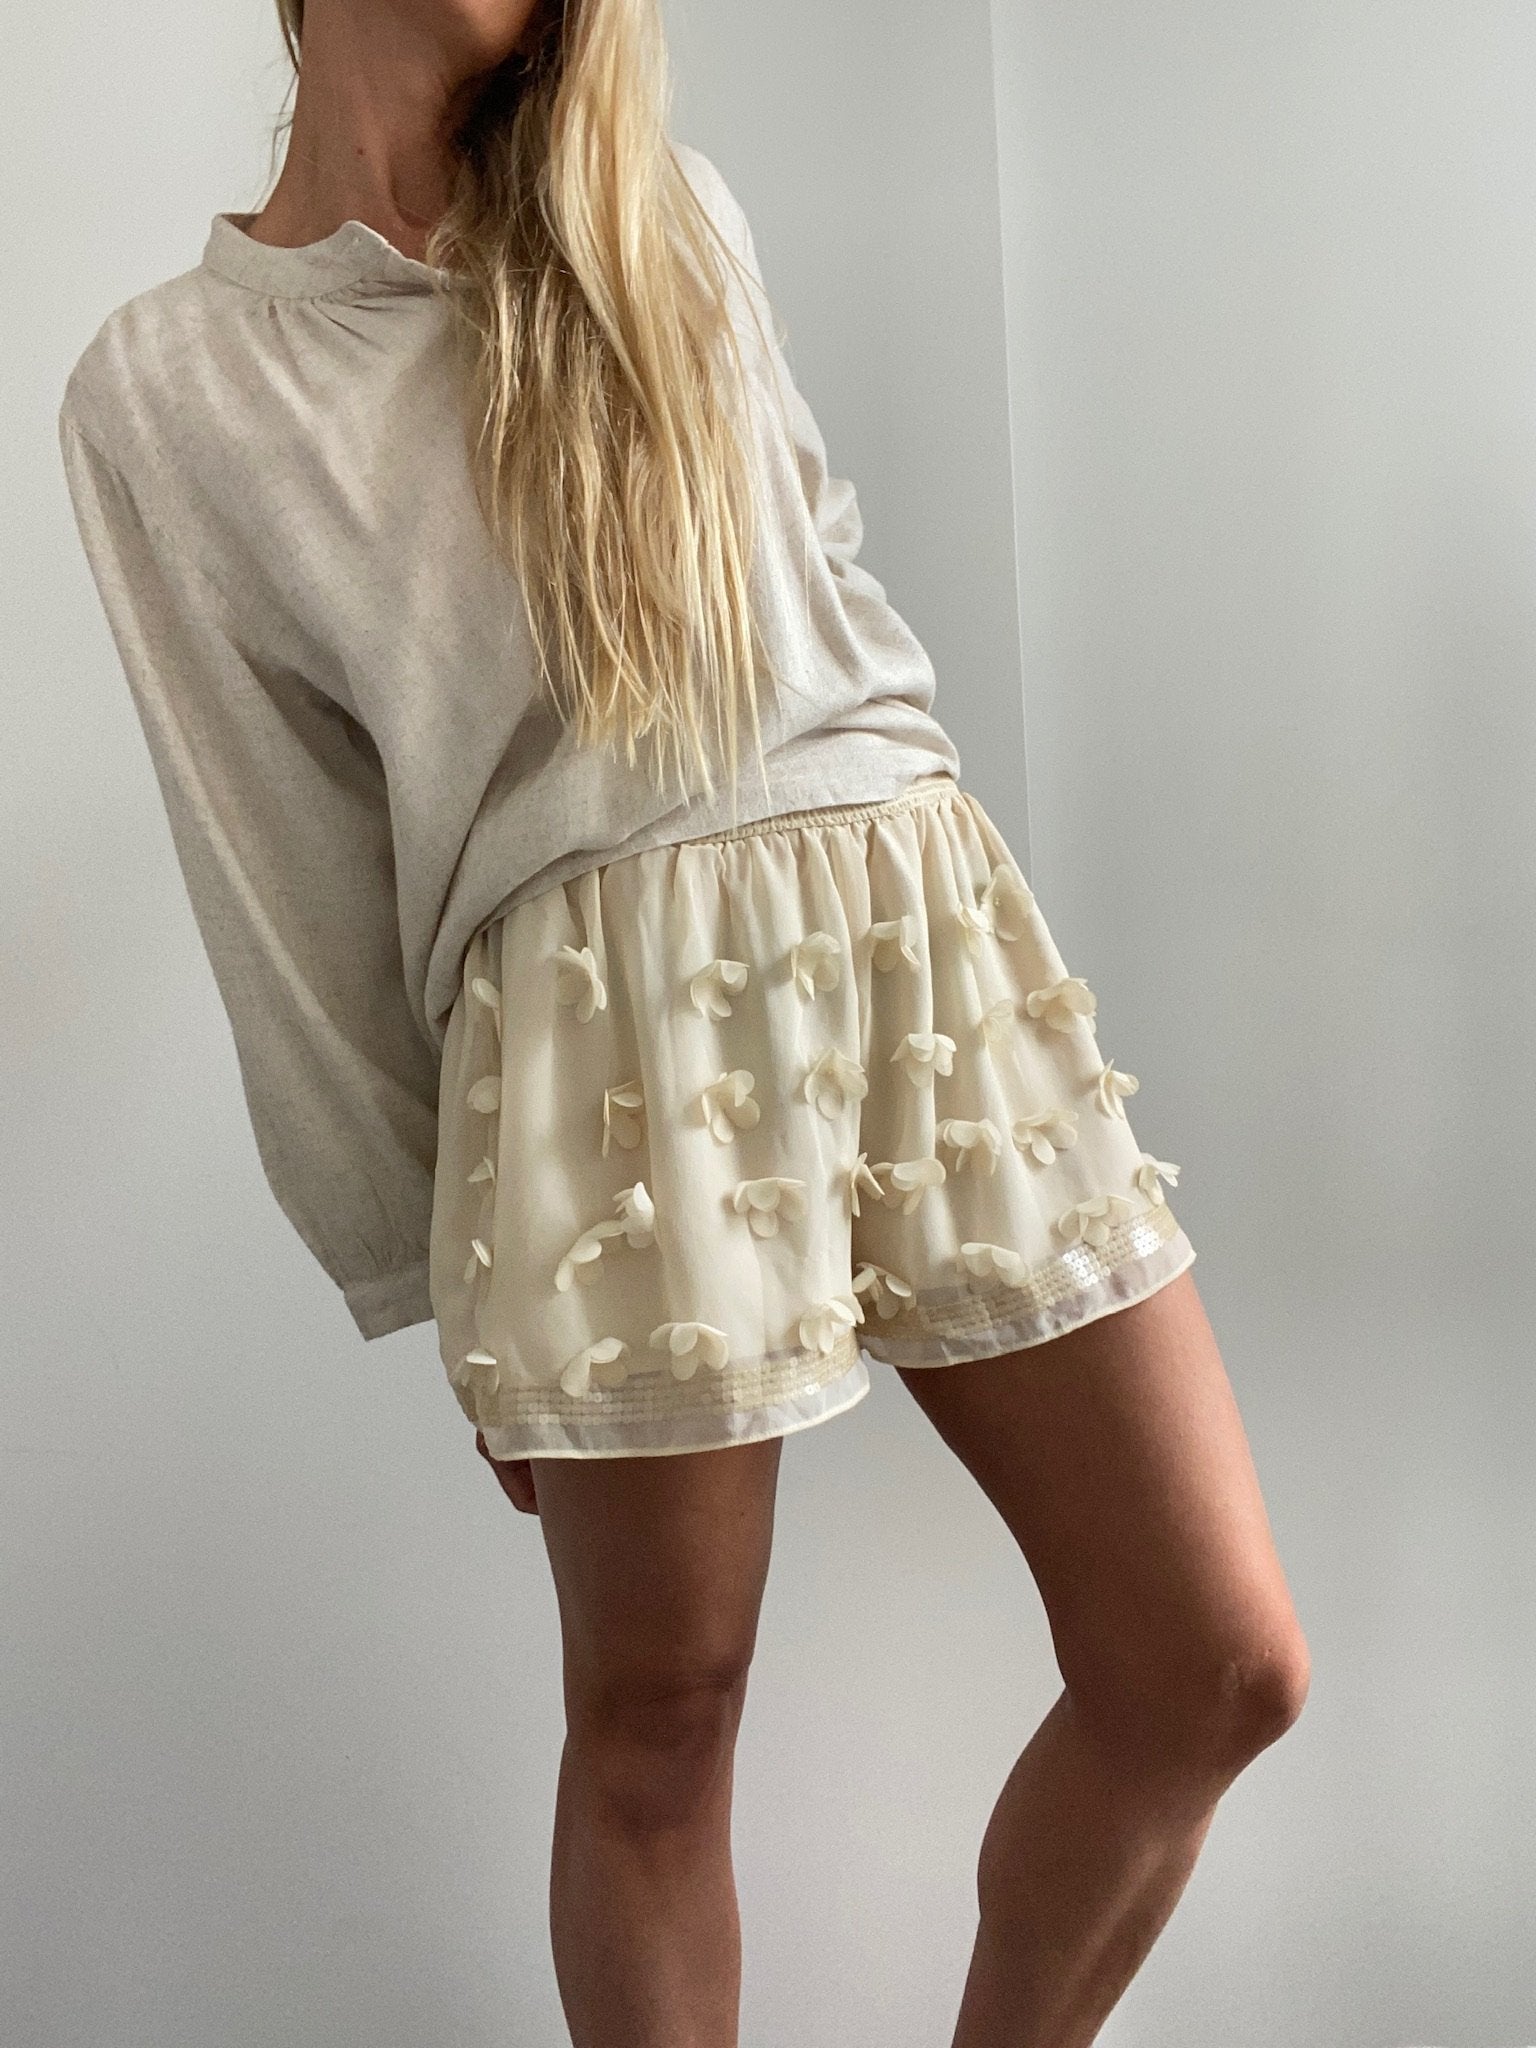 Not specified Shorts Cream Flower Shorts